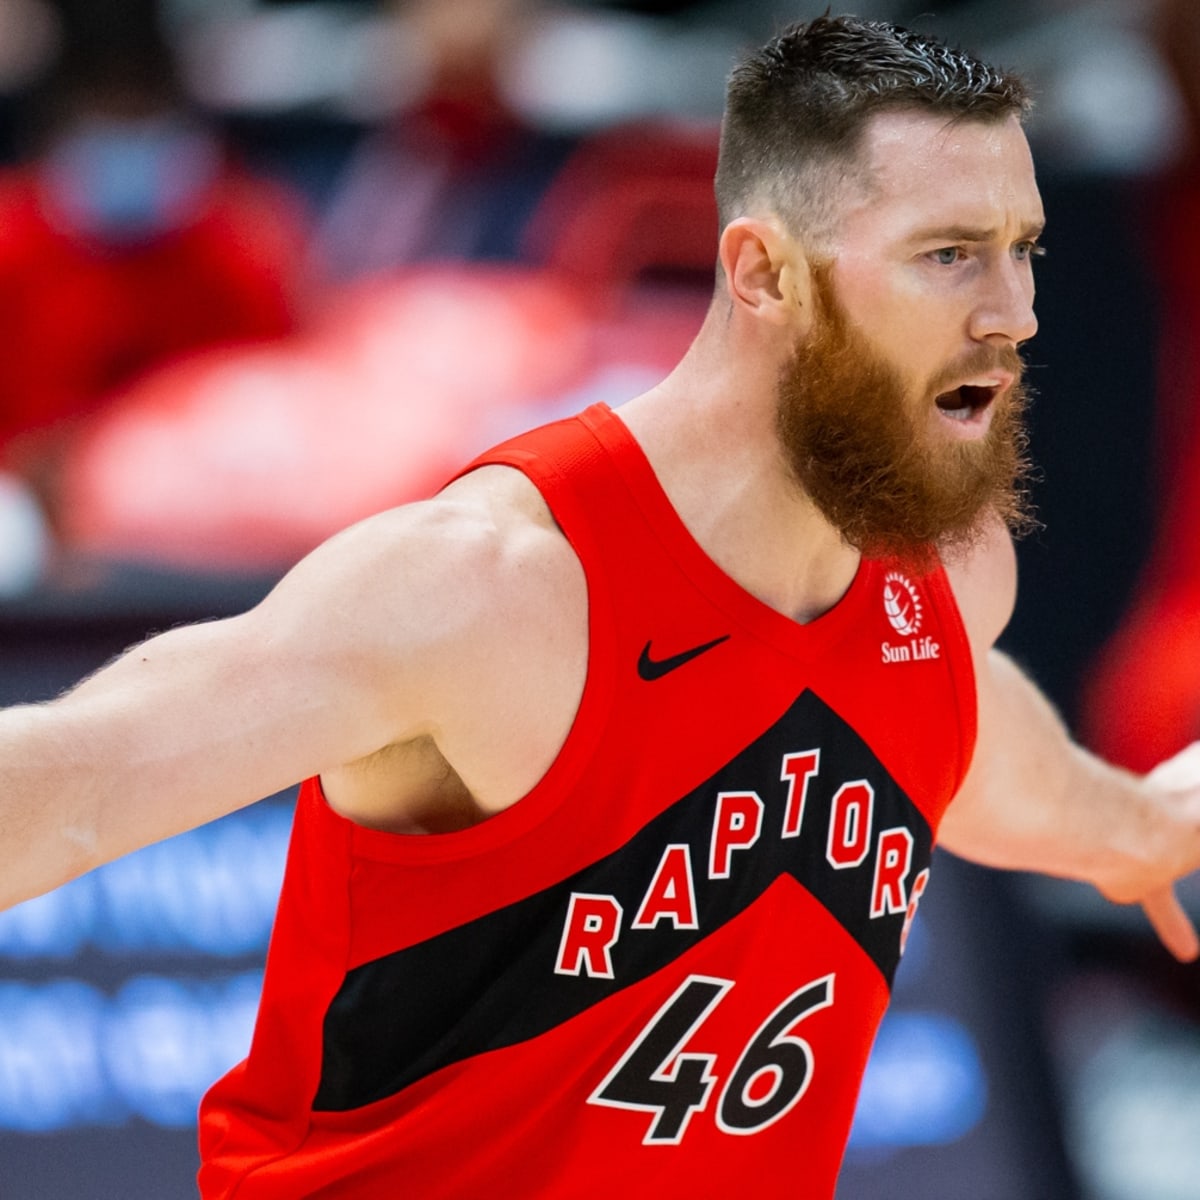 Aron Baynes to play for NBL's Brisbane Bullets with goal of returning to  NBA - ESPN